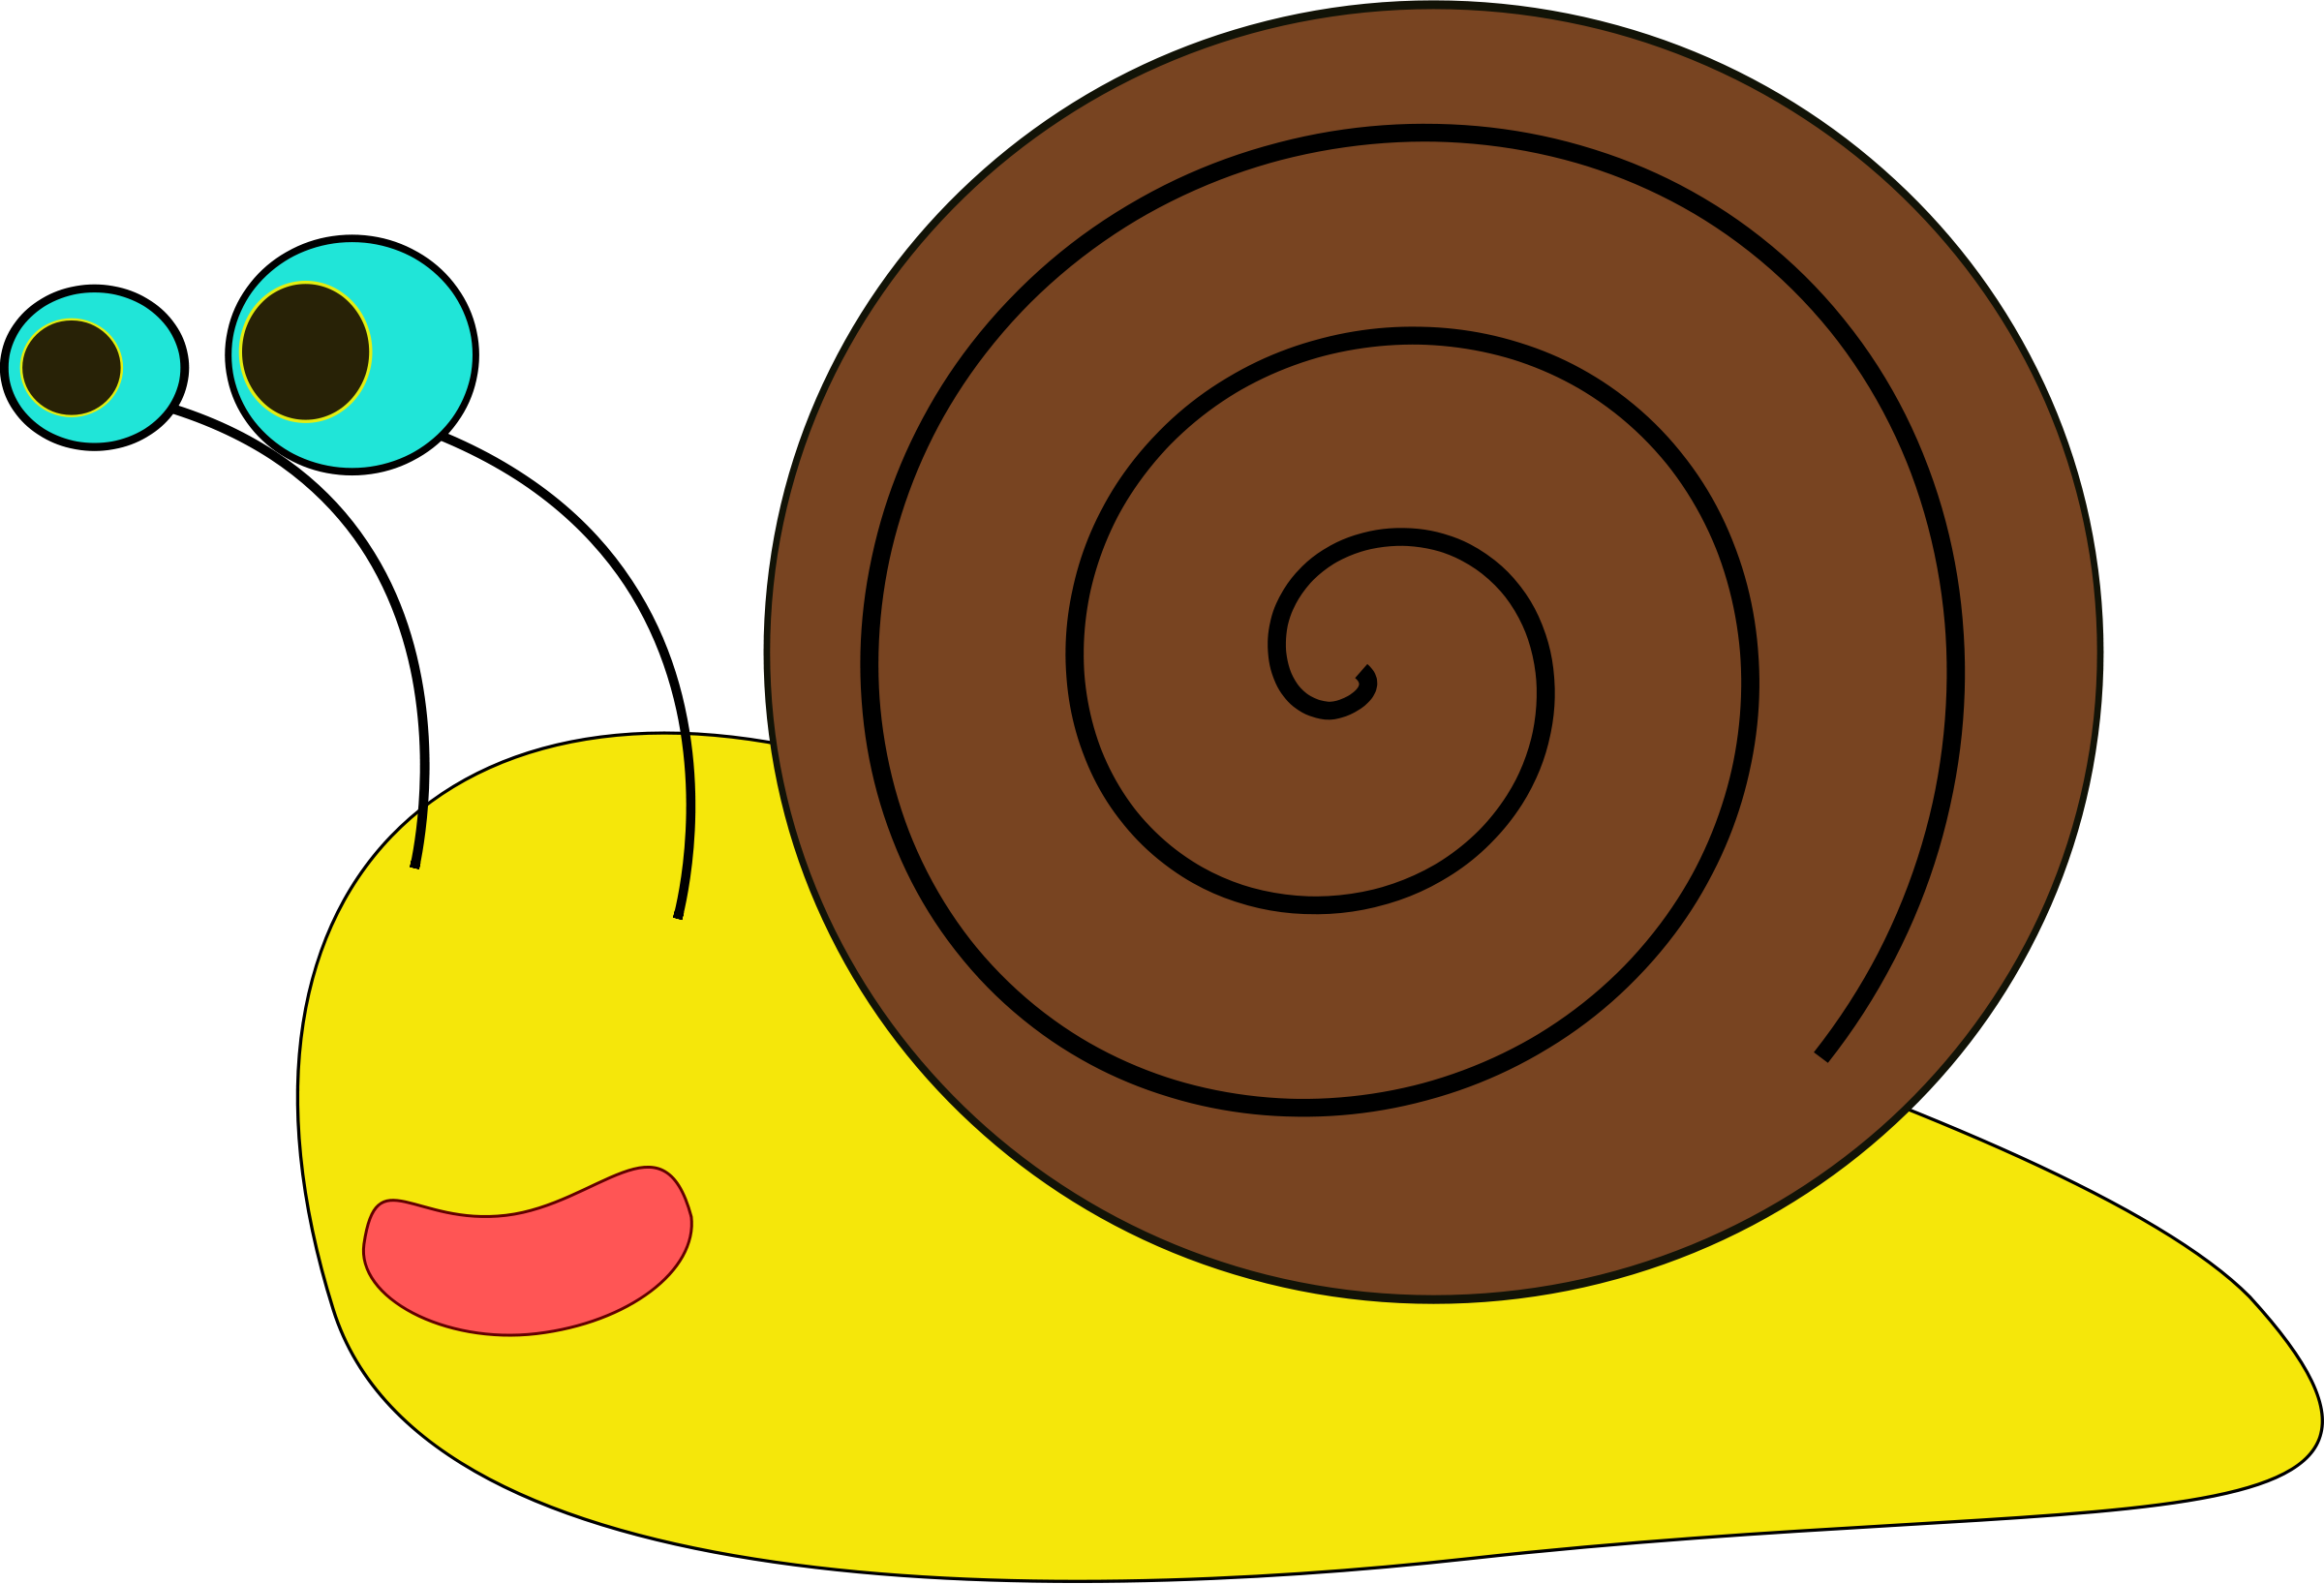 Snail Clipart Black And White Clipart Panda Free Clipart Images